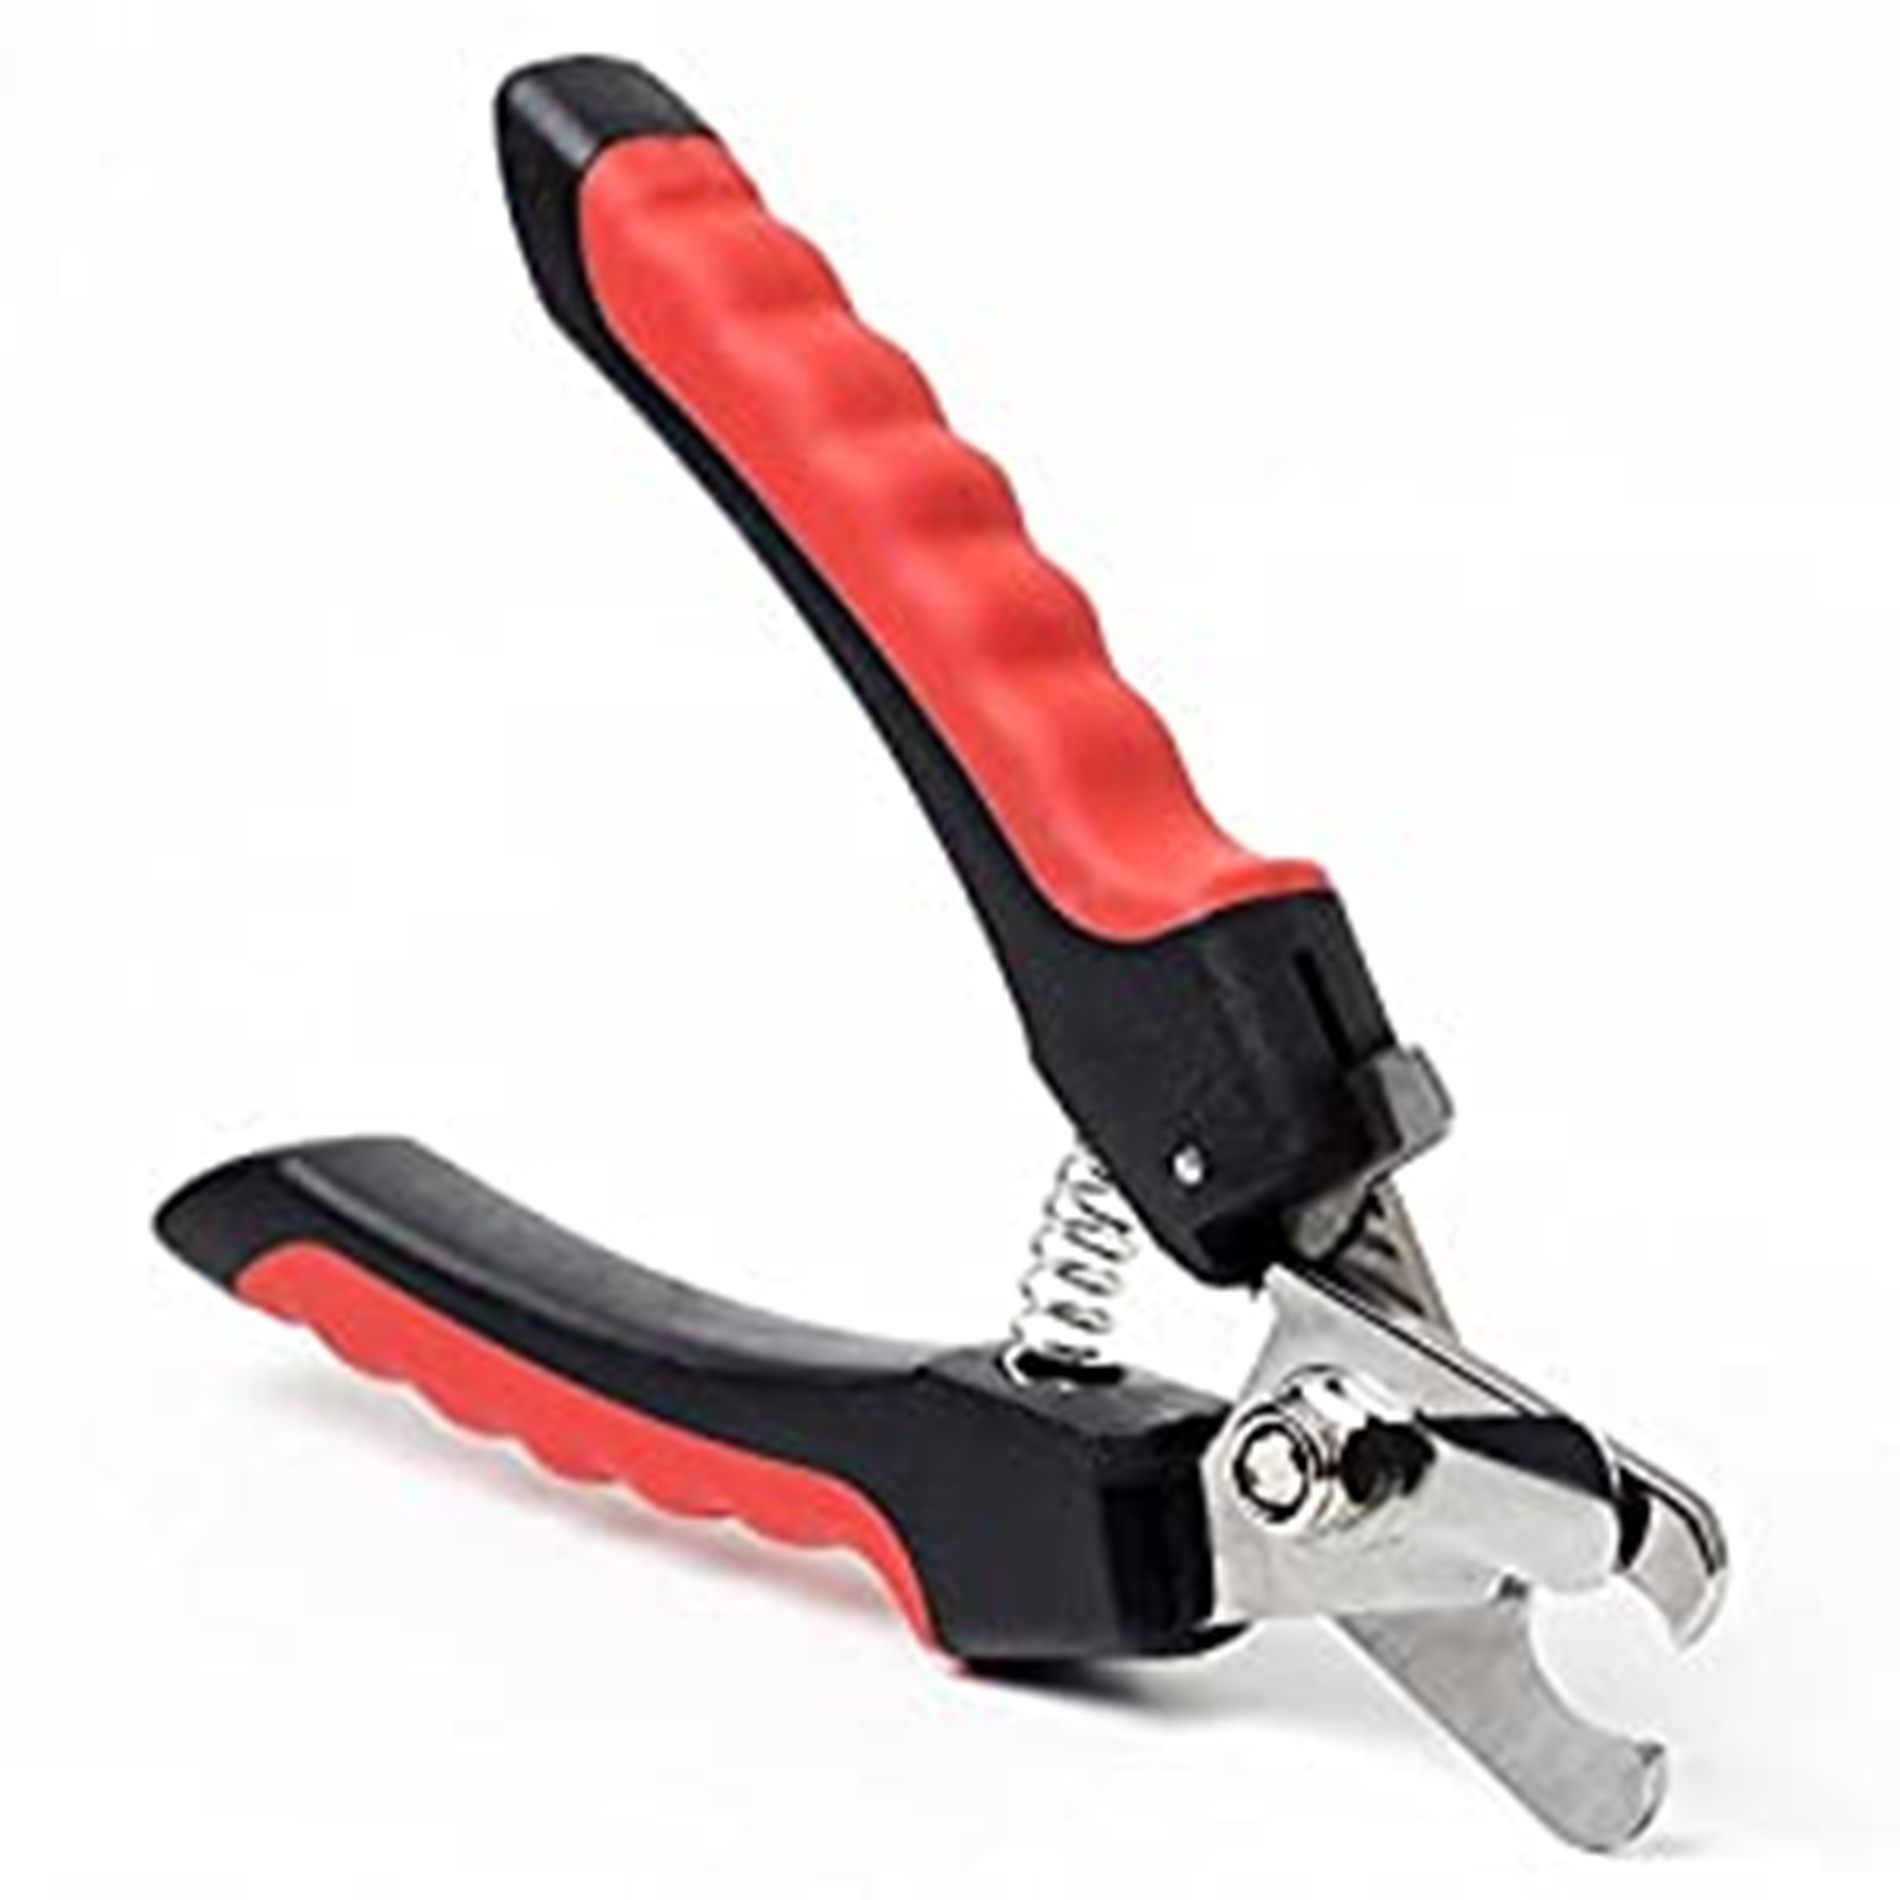 Petshop7 Professional Nail Cutter Clipper Suitable Pets Like Dogs & Cats Claw & Nails Clippers (Red) Small